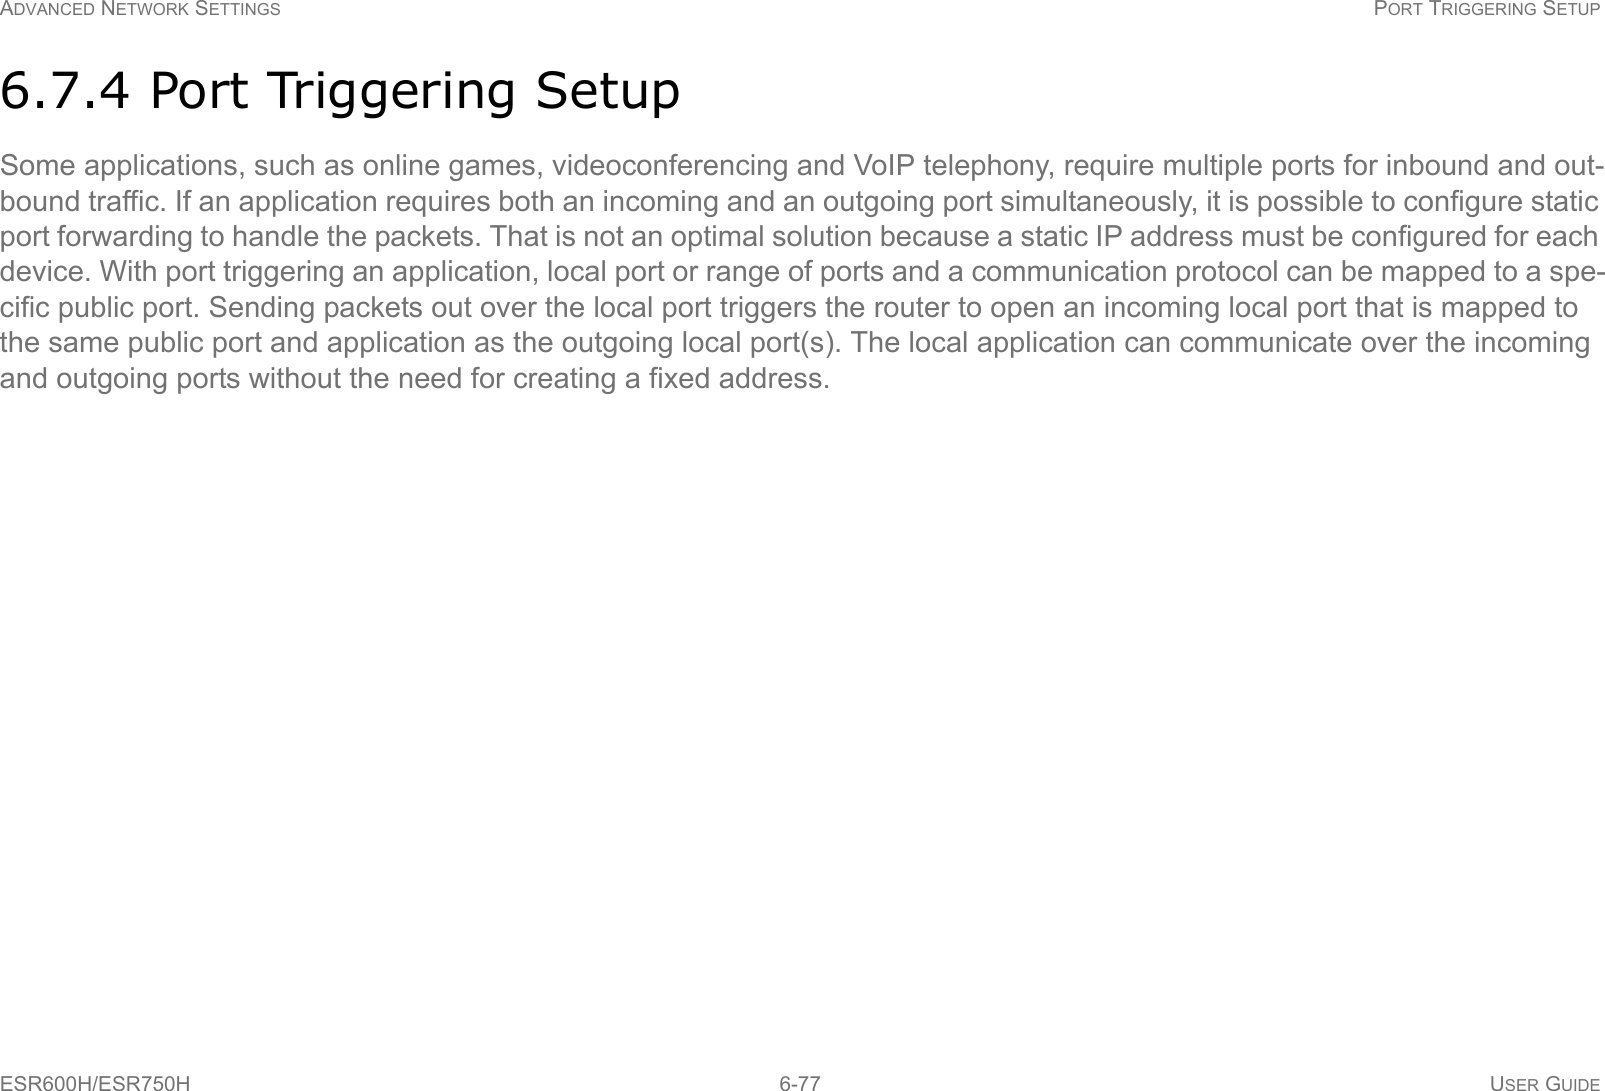 ADVANCED NETWORK SETTINGS PORT TRIGGERING SETUPESR600H/ESR750H 6-77 USER GUIDE6.7.4 Port Triggering SetupSome applications, such as online games, videoconferencing and VoIP telephony, require multiple ports for inbound and out-bound traffic. If an application requires both an incoming and an outgoing port simultaneously, it is possible to configure static port forwarding to handle the packets. That is not an optimal solution because a static IP address must be configured for each device. With port triggering an application, local port or range of ports and a communication protocol can be mapped to a spe-cific public port. Sending packets out over the local port triggers the router to open an incoming local port that is mapped to the same public port and application as the outgoing local port(s). The local application can communicate over the incoming and outgoing ports without the need for creating a fixed address.